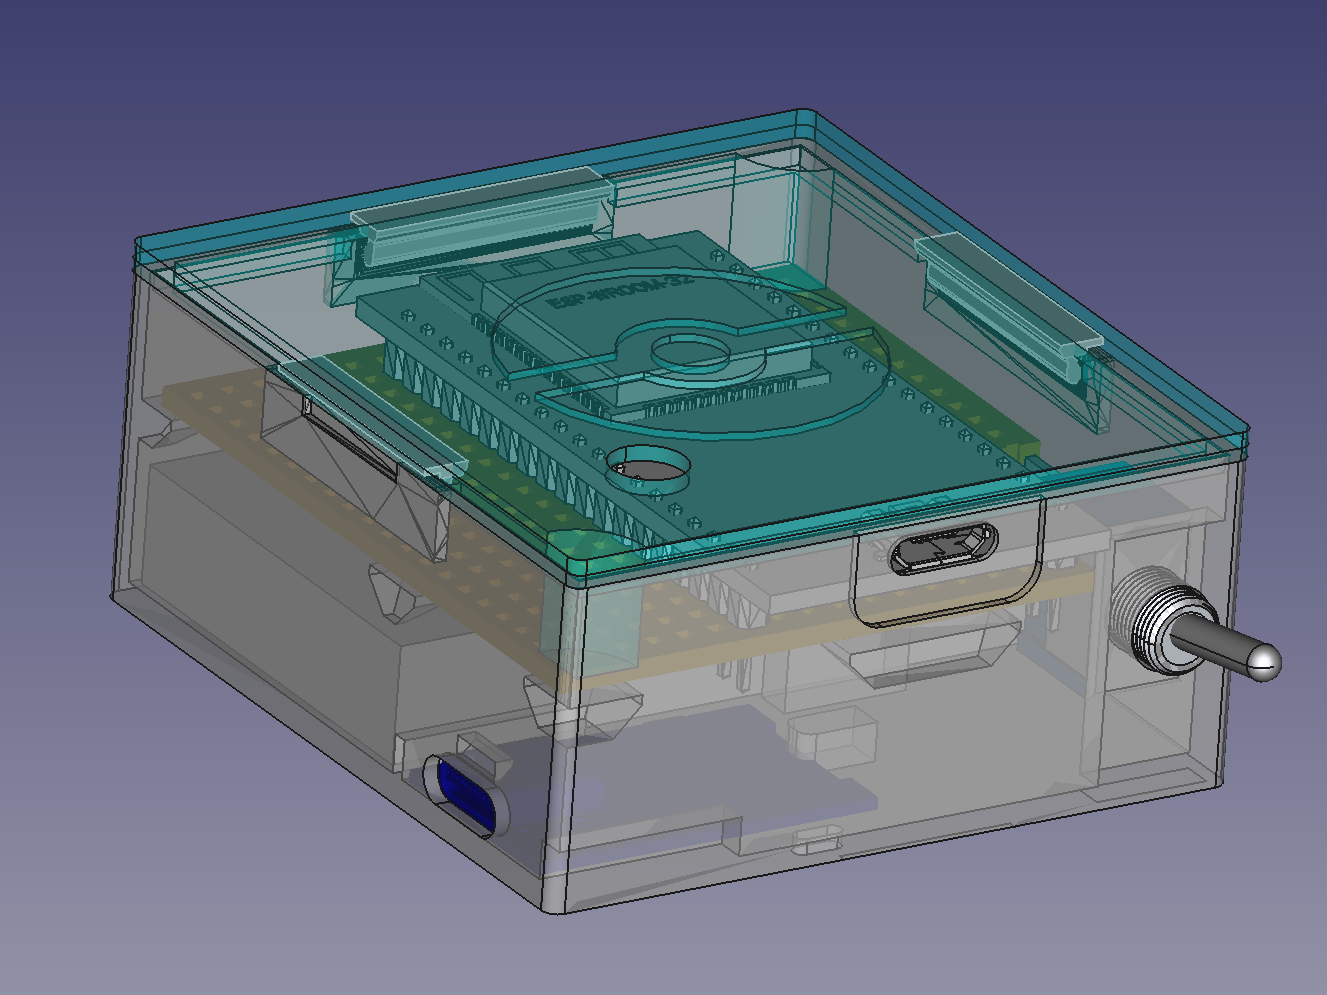 3D model of the gadget in FreeCAD